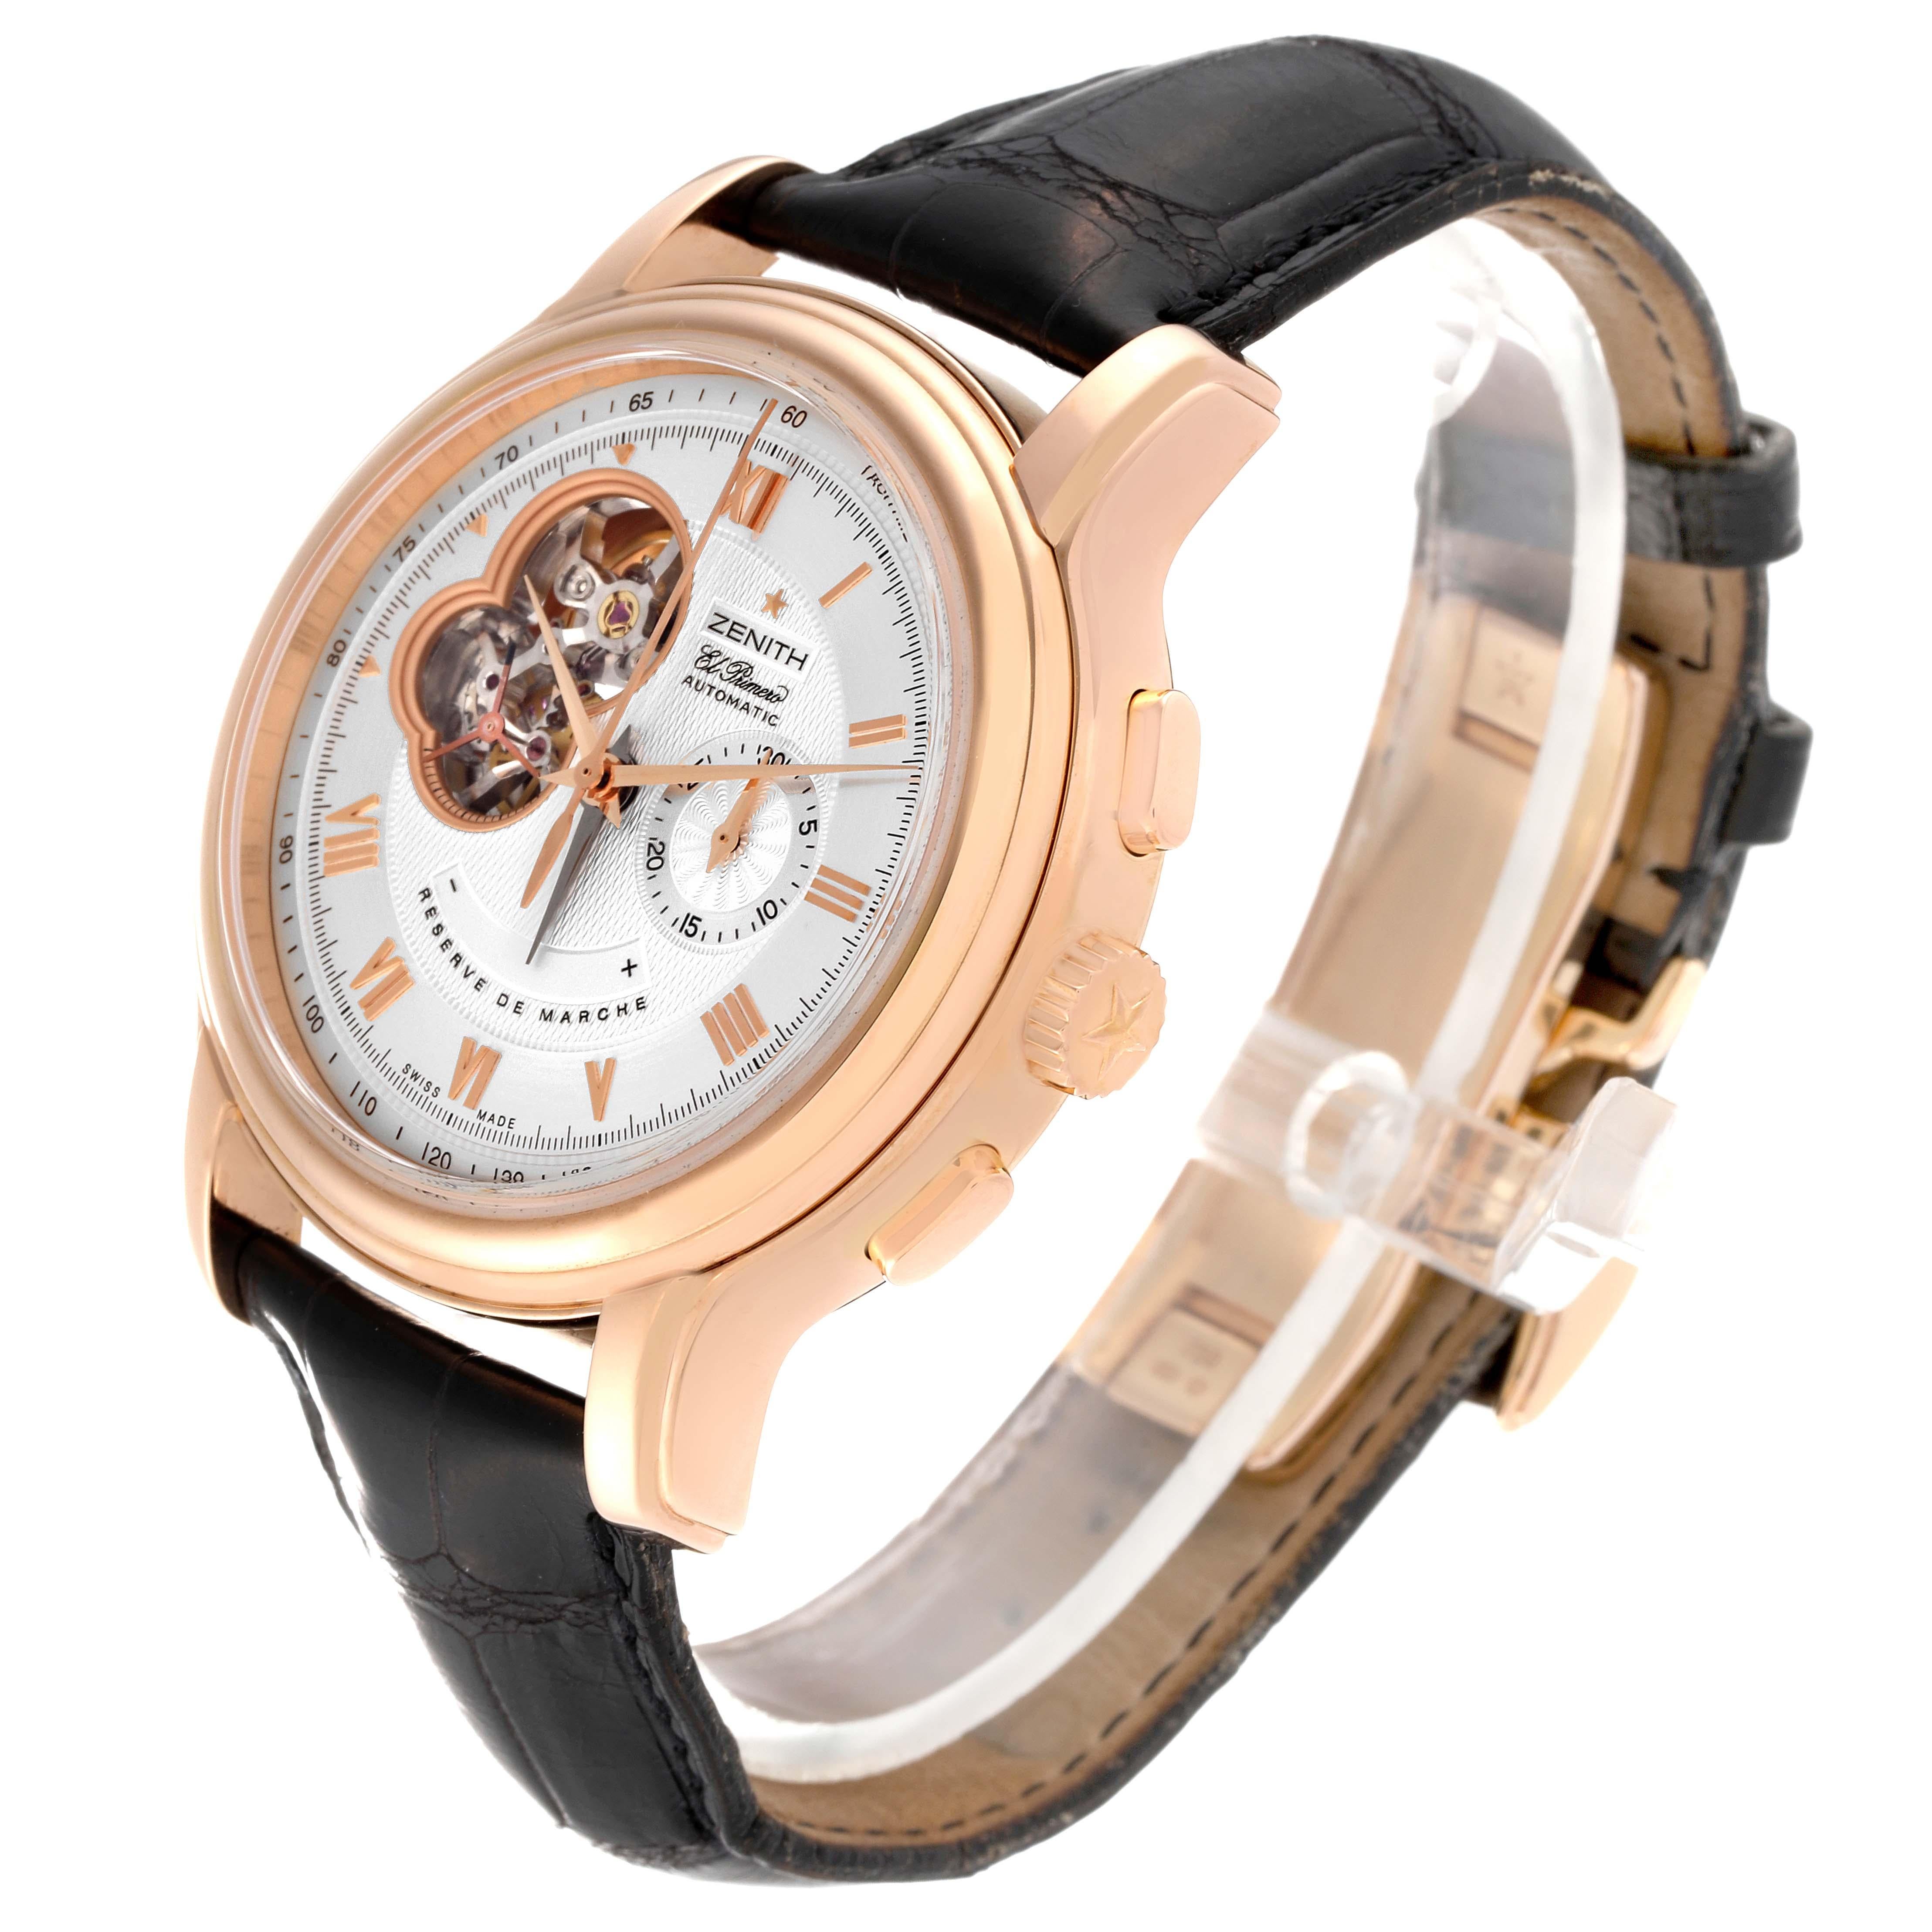 Zenith Chronomaster XXT Open Rose Gold Mens Watch 18.1260.4021 Box Papers In Excellent Condition For Sale In Atlanta, GA